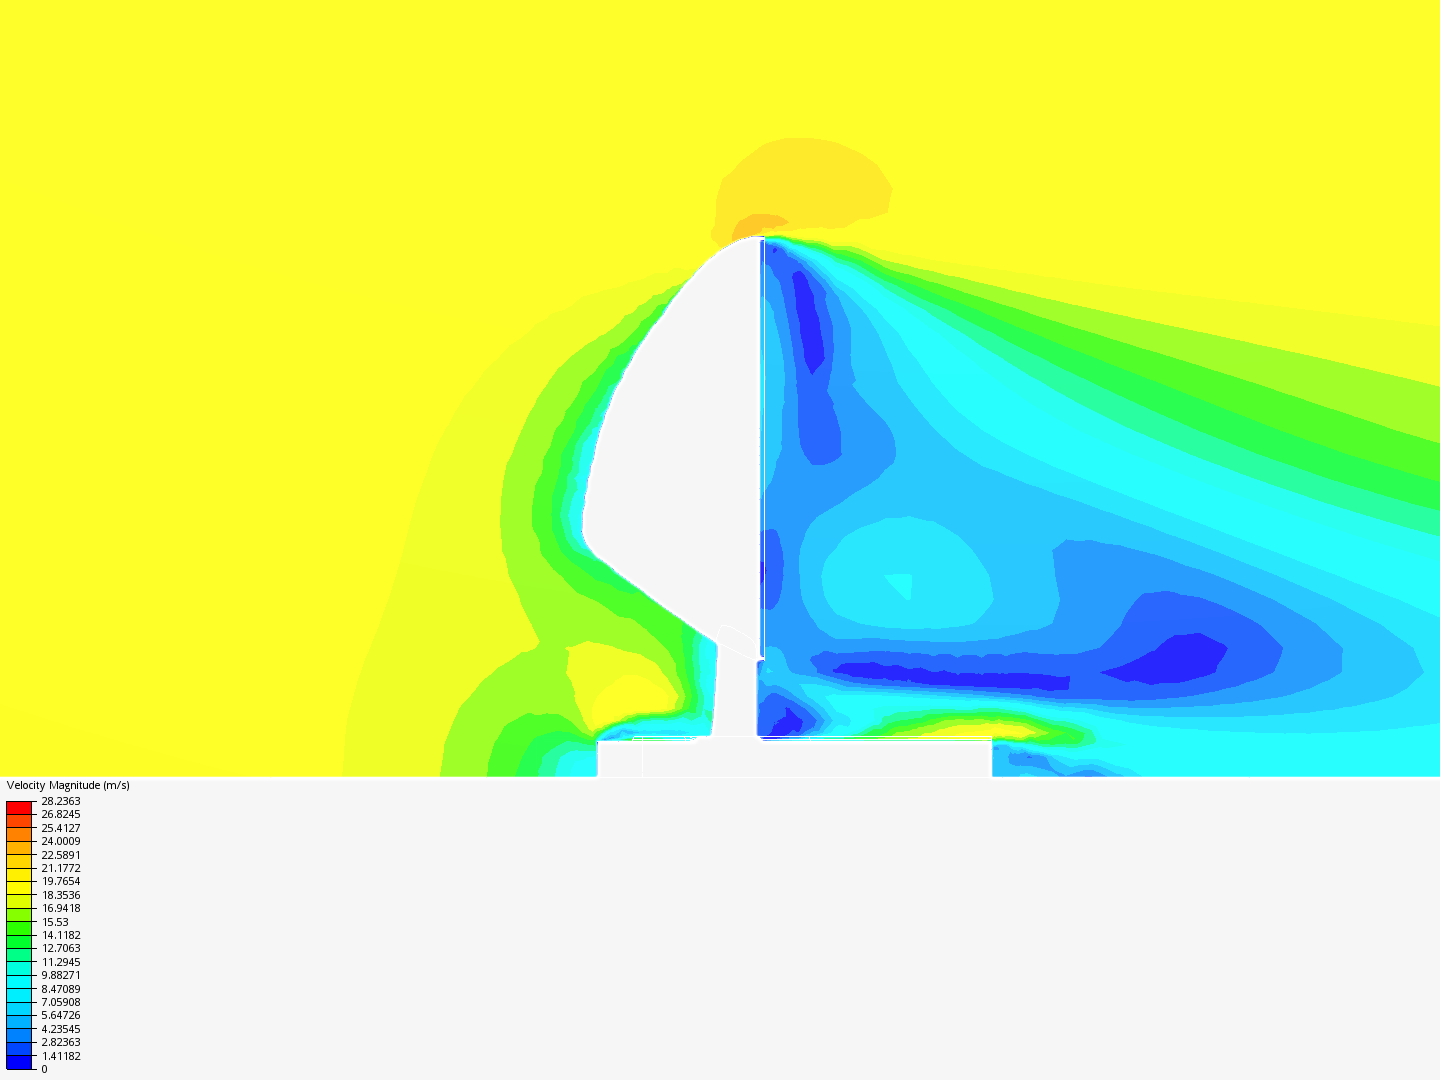 Side view mirror air flow simulation image